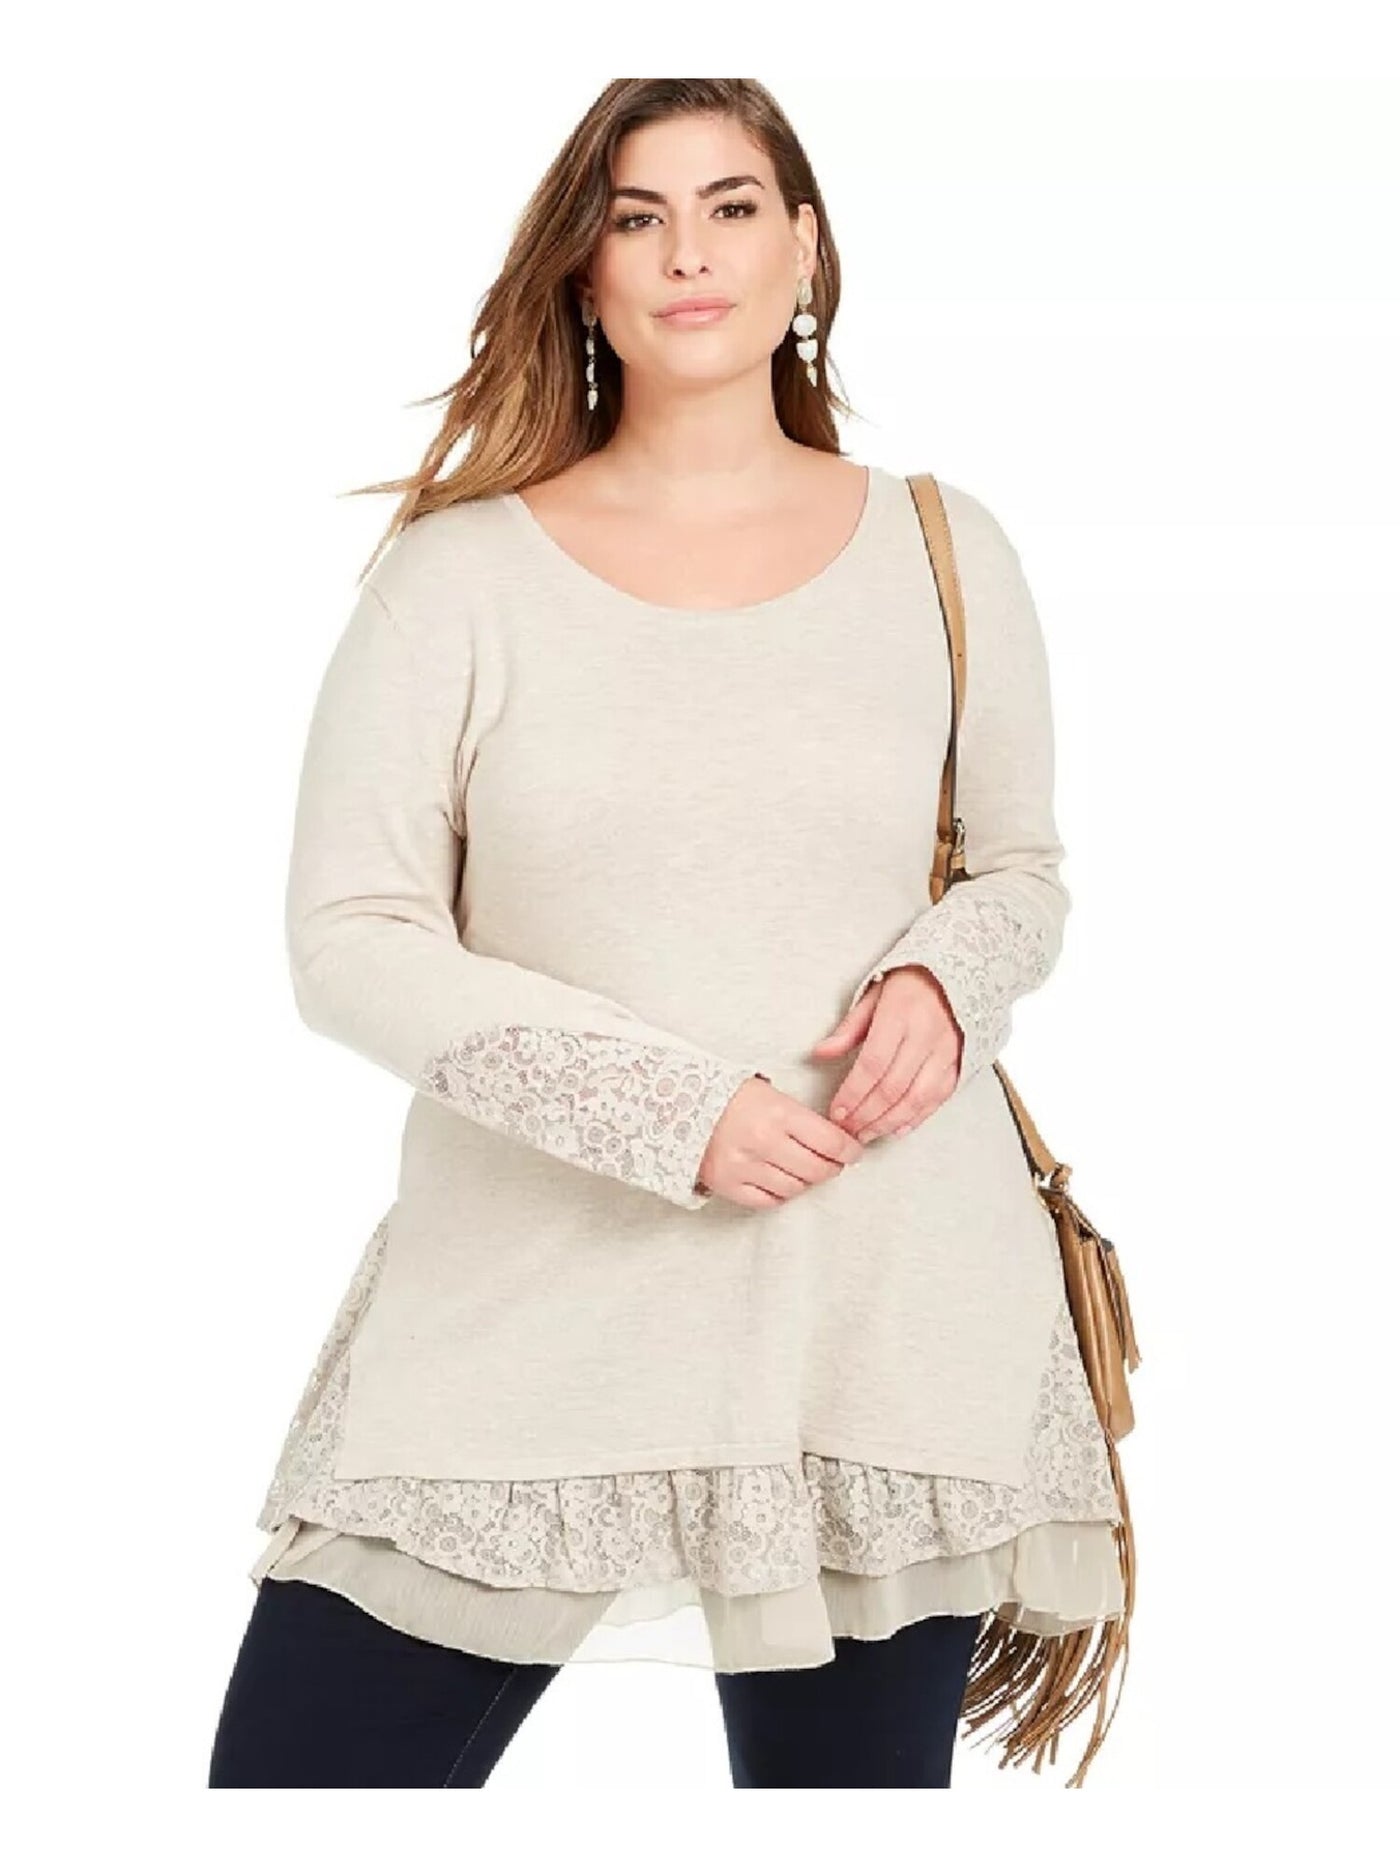 STYLE & COMPANY Womens Beige Sheer Lace Layered Long Sleeve Scoop Neck Tunic Top XS